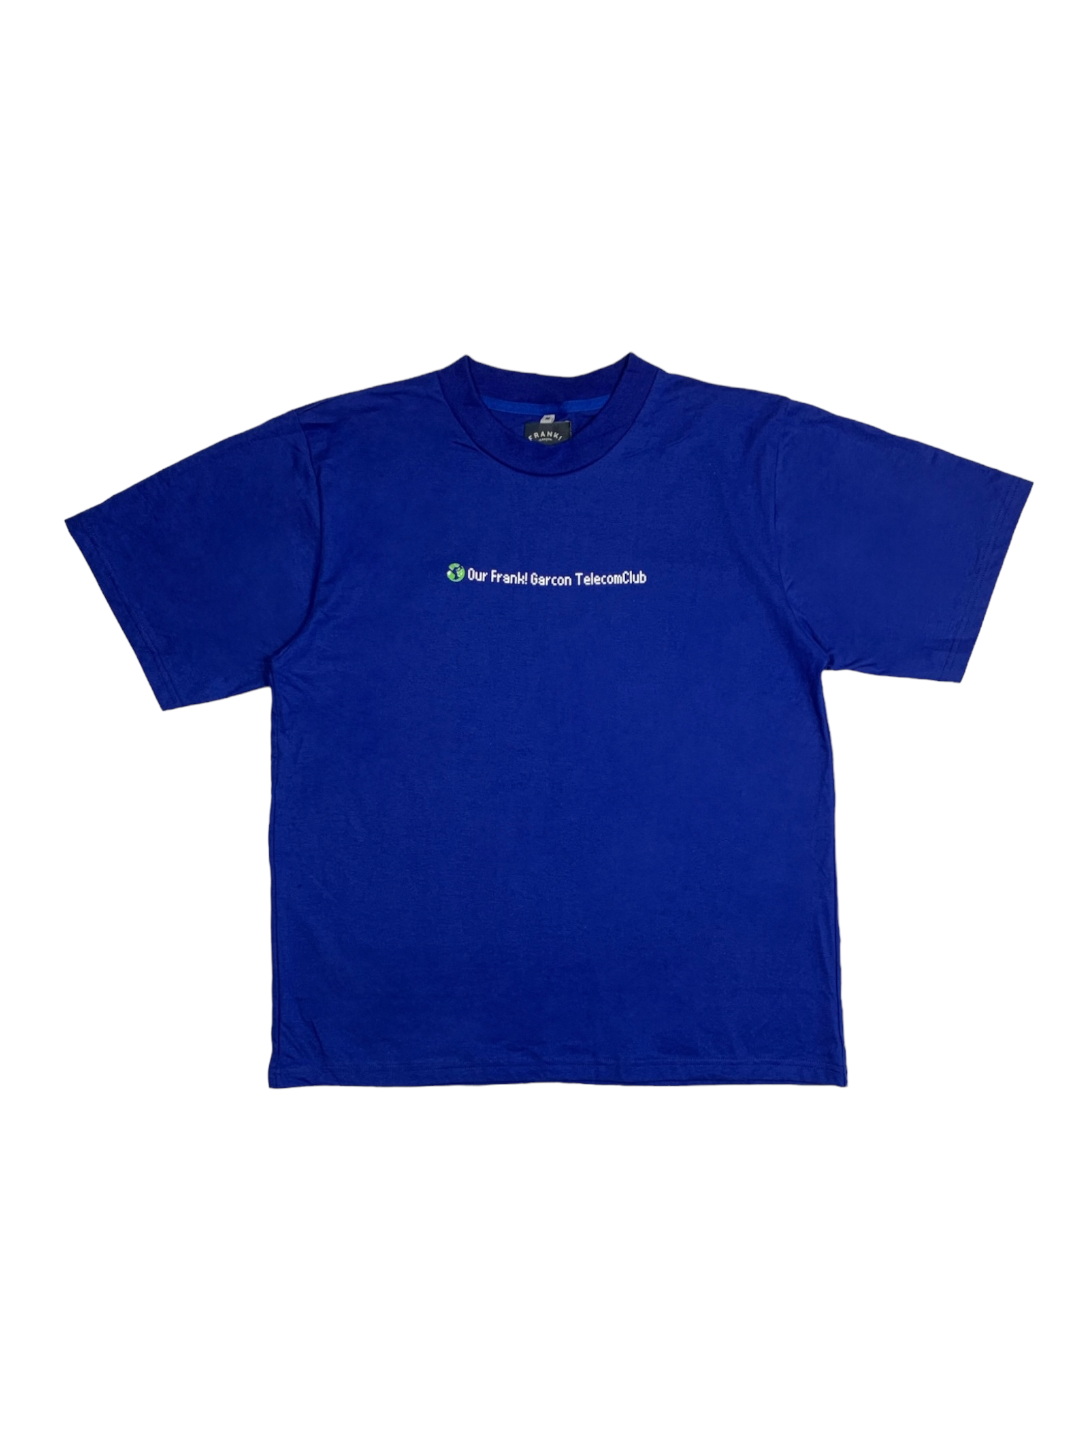 OUR FRANK GARCON TEE (BLUE)